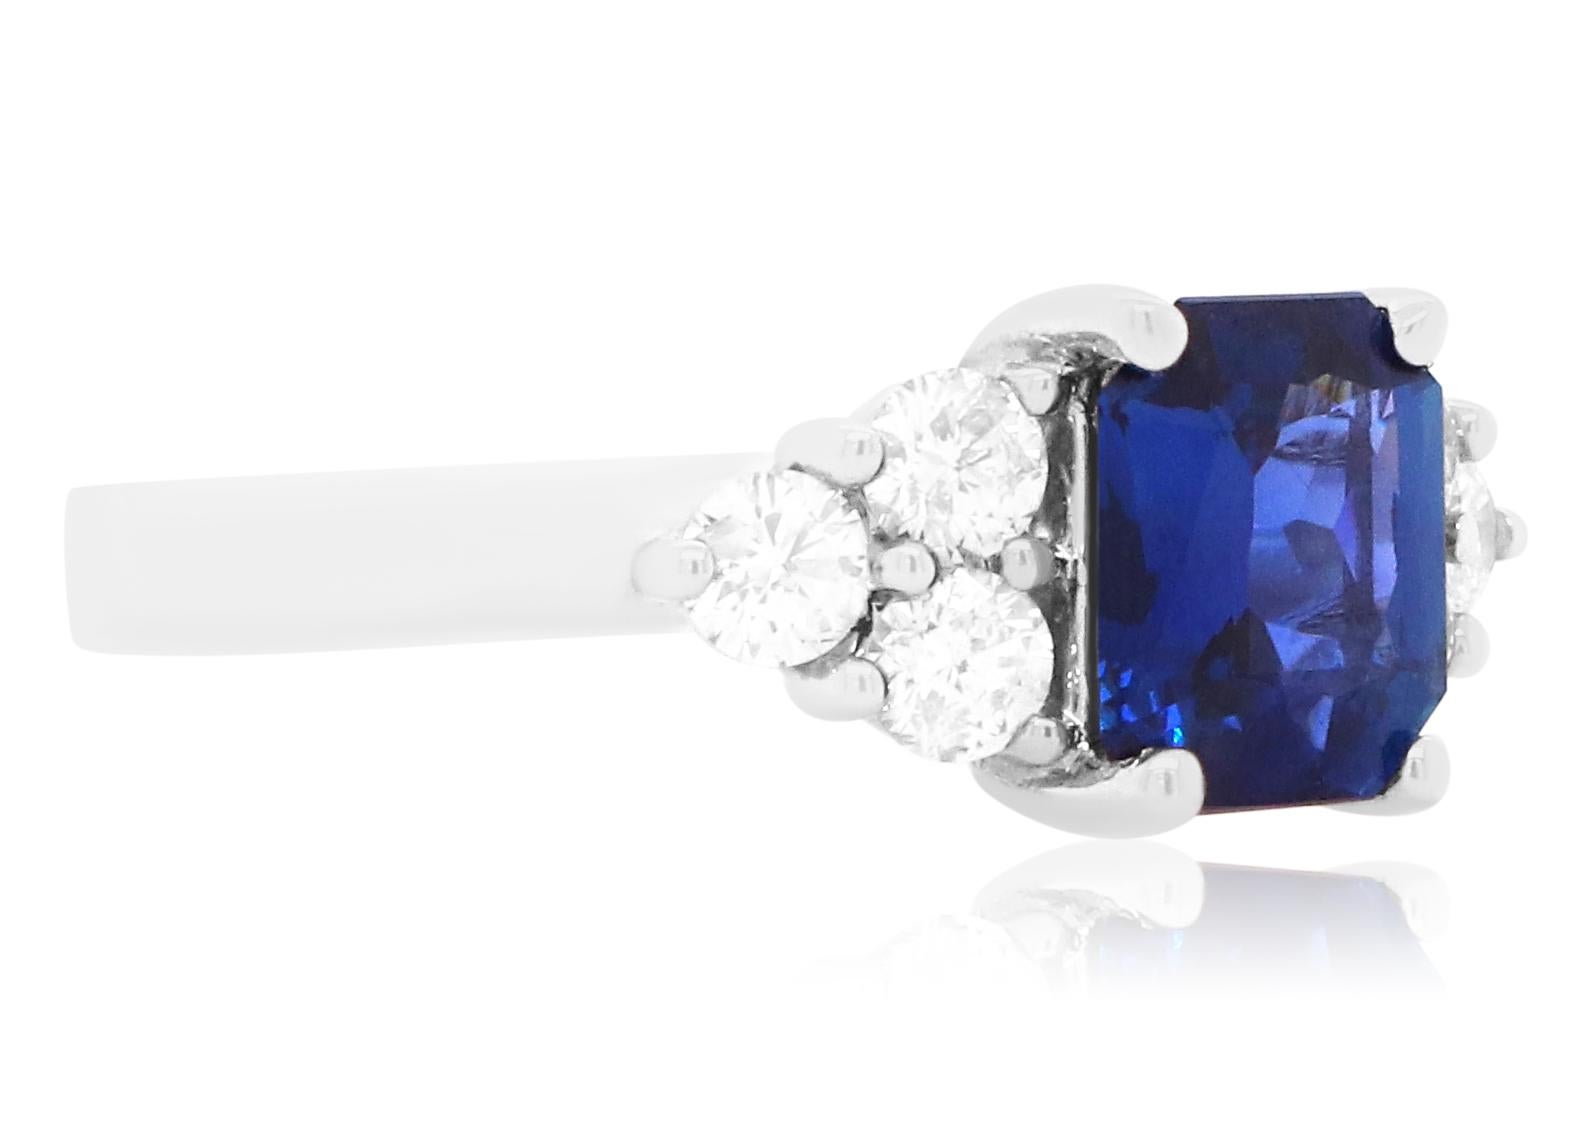 Material: 18k White Gold 
Center Stone Details:  1 Radiant Cut Blue Sapphire at 2.05 Carats - Measuring 8 x 6.8 mm
Diamond Details: 6 Brilliant Round White Diamonds at Approximately 0.70 Carats - Clarity: SI / Color: H-I
Alberto offers complimentary